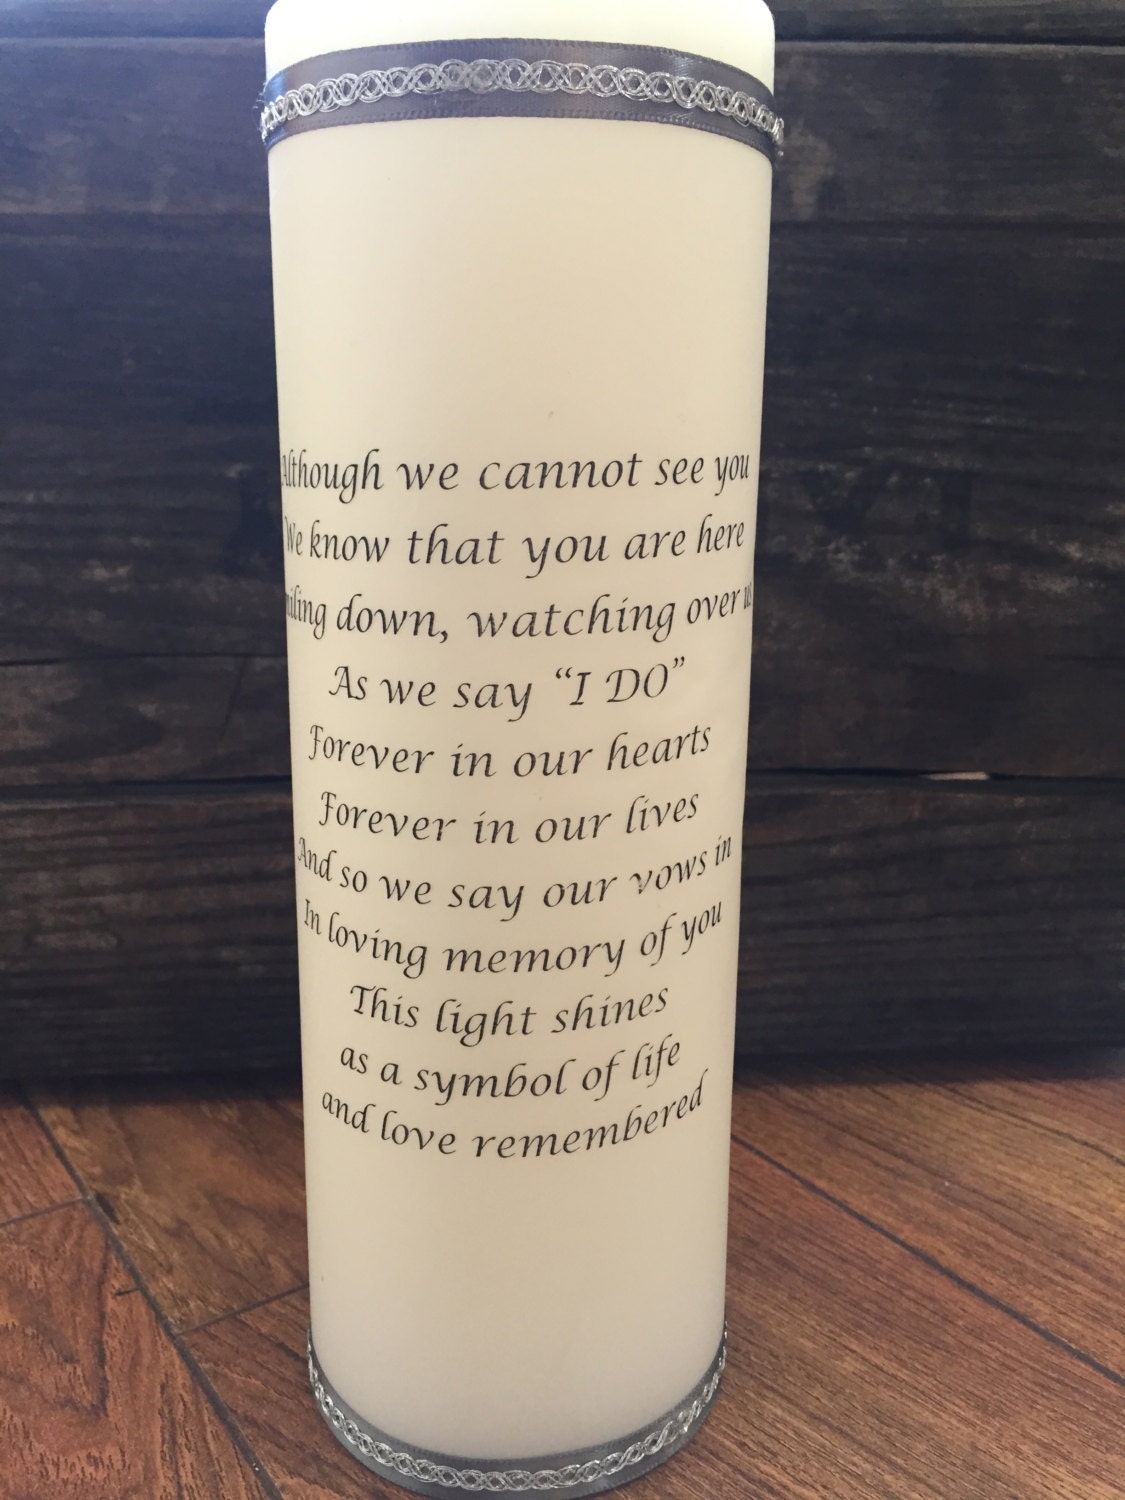 How do you choose the wording for a unity candle lighting in a wedding ceremony?